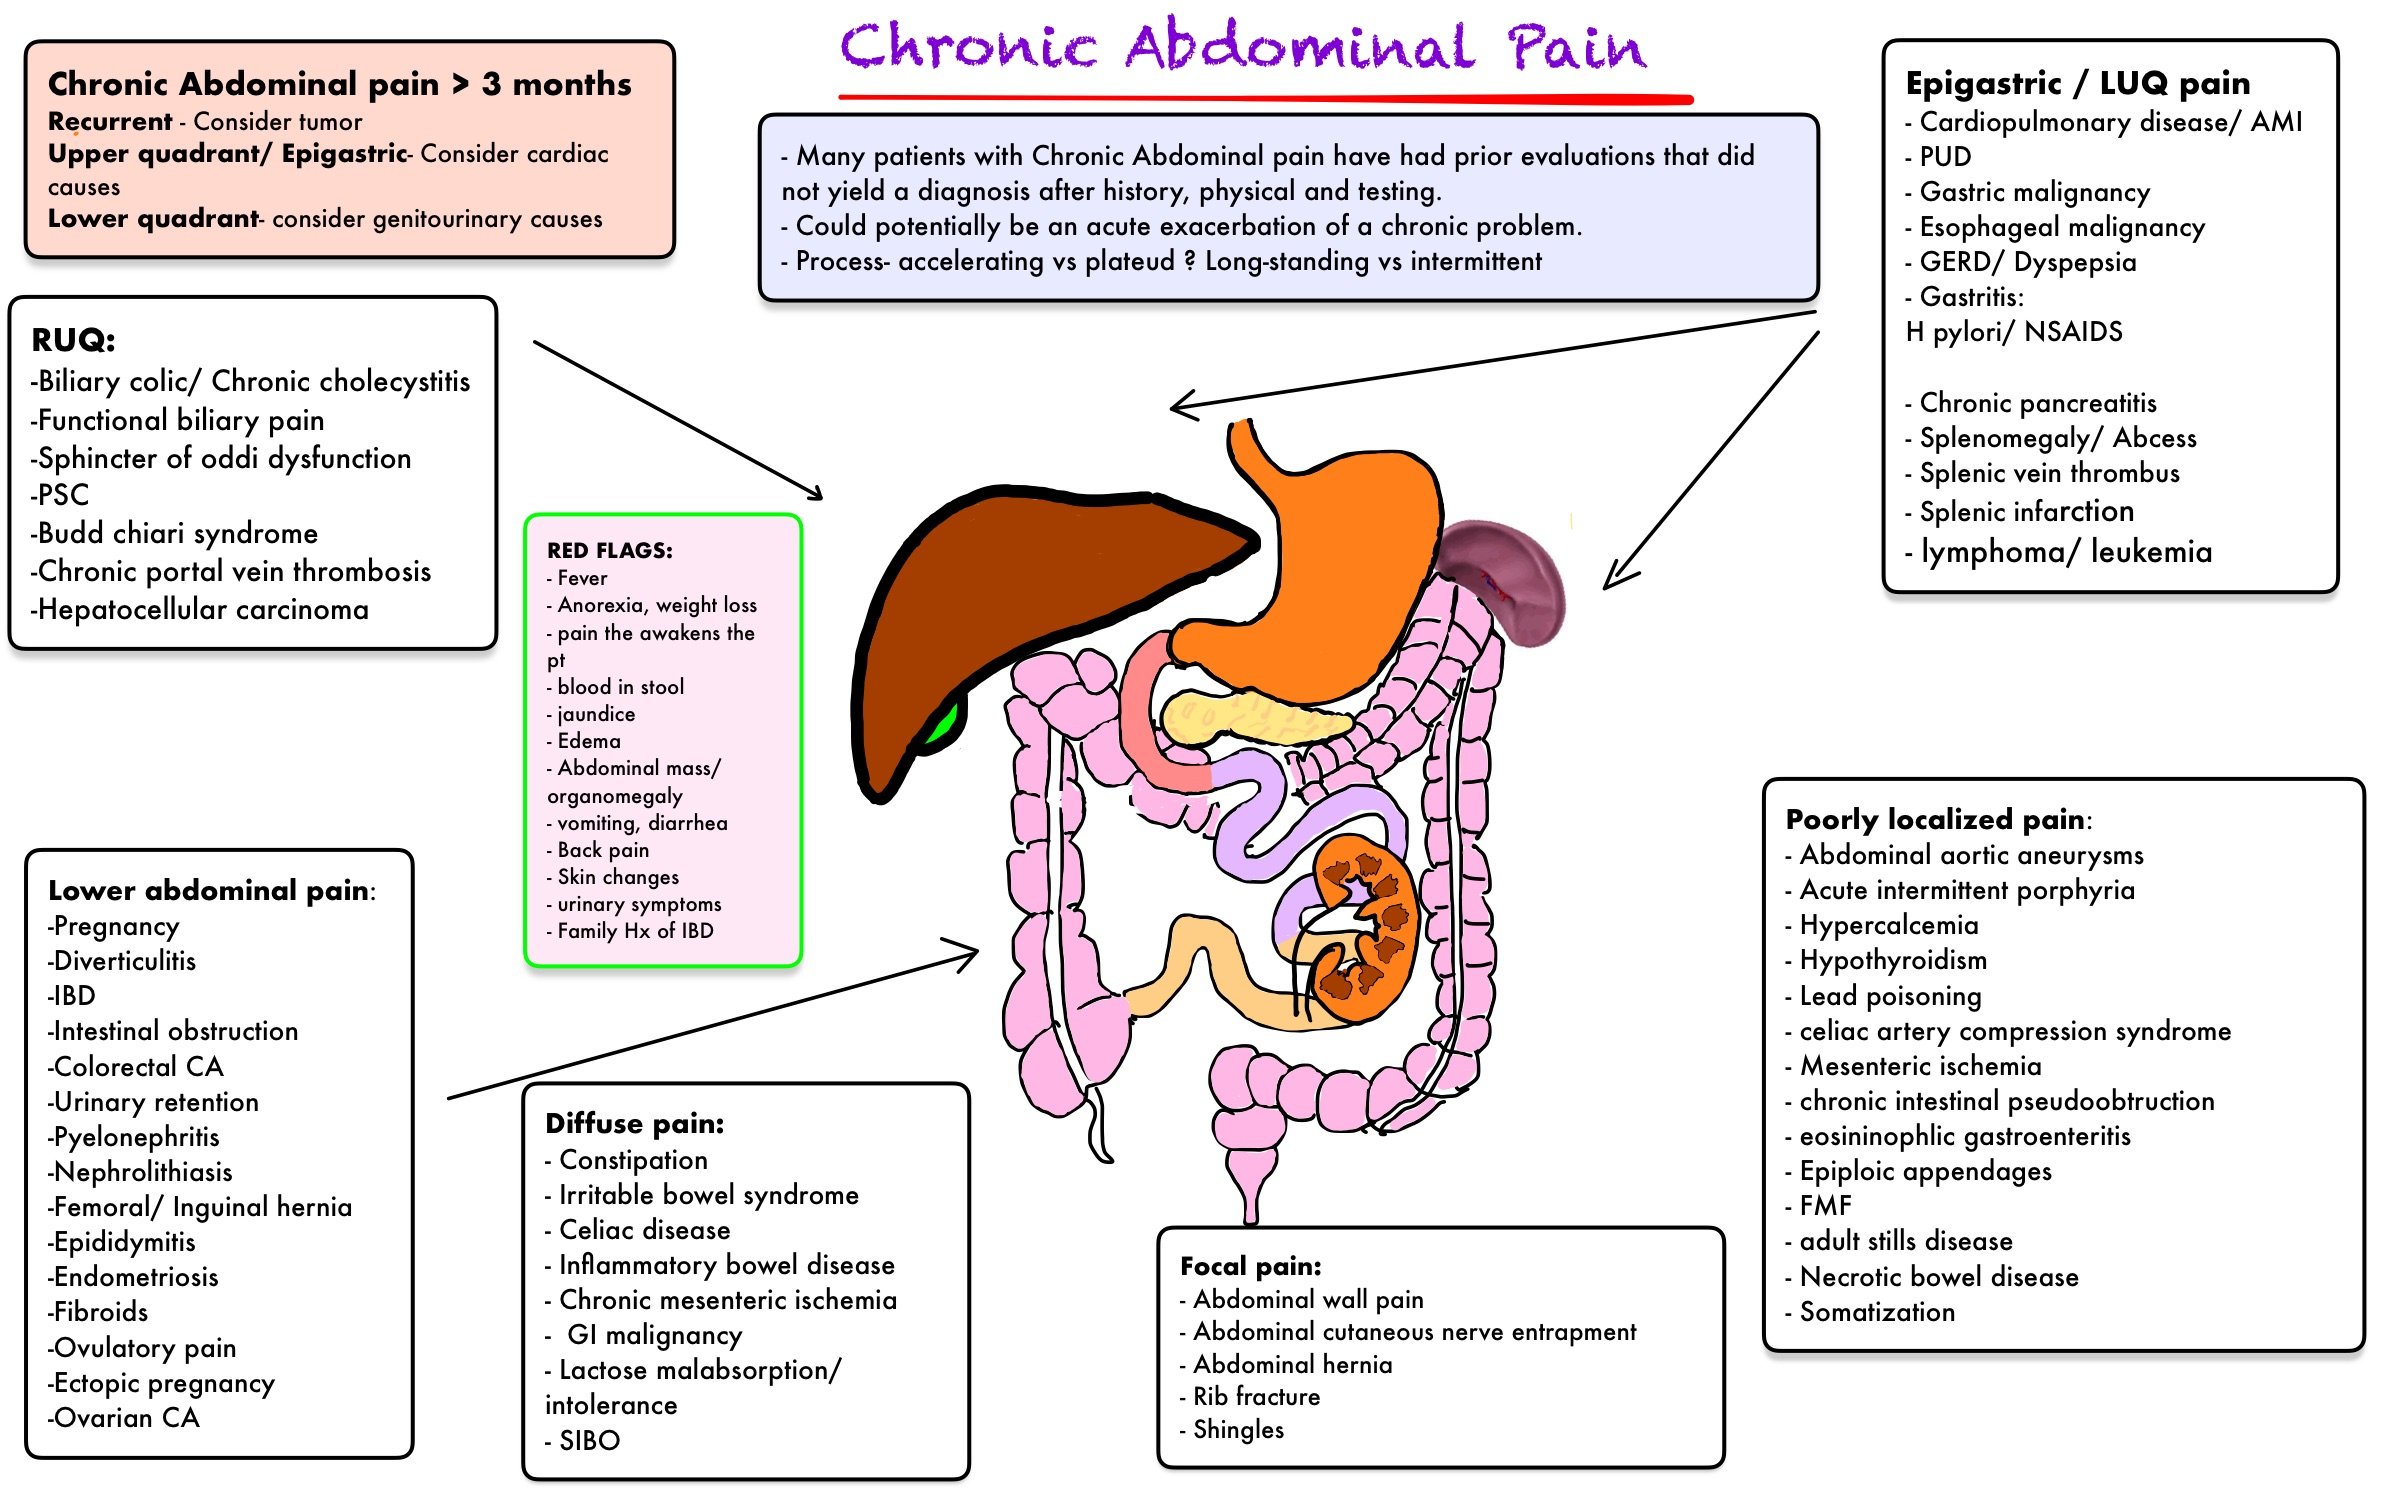 Causes of Chronic Abdominal Pain